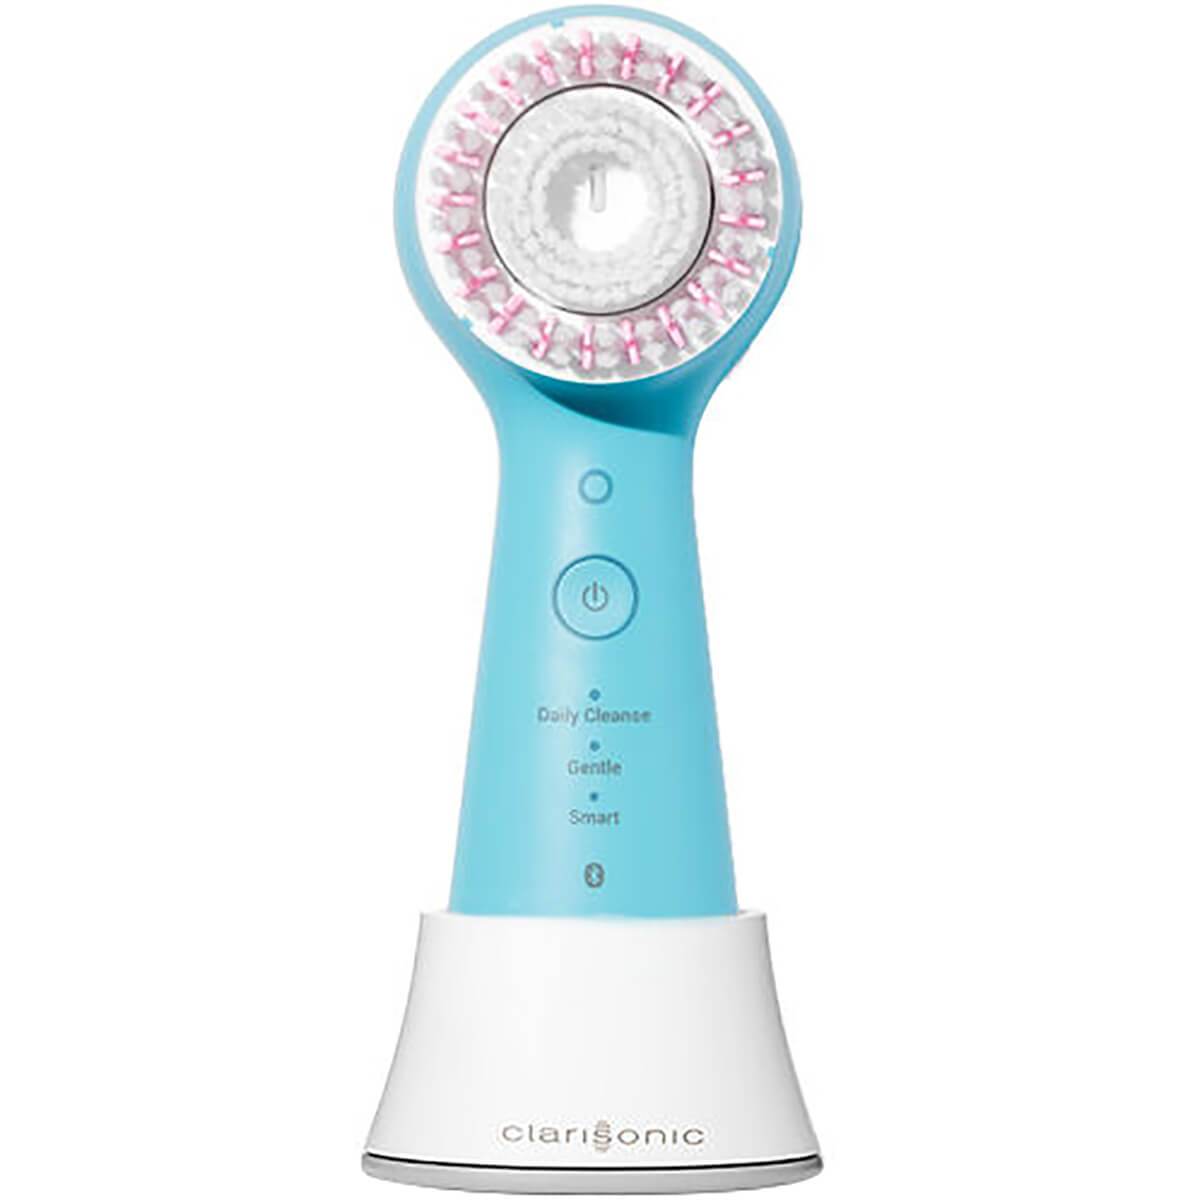 Clarisonic Mia Smart Facial Cleansing Brush | CurrentBody USA